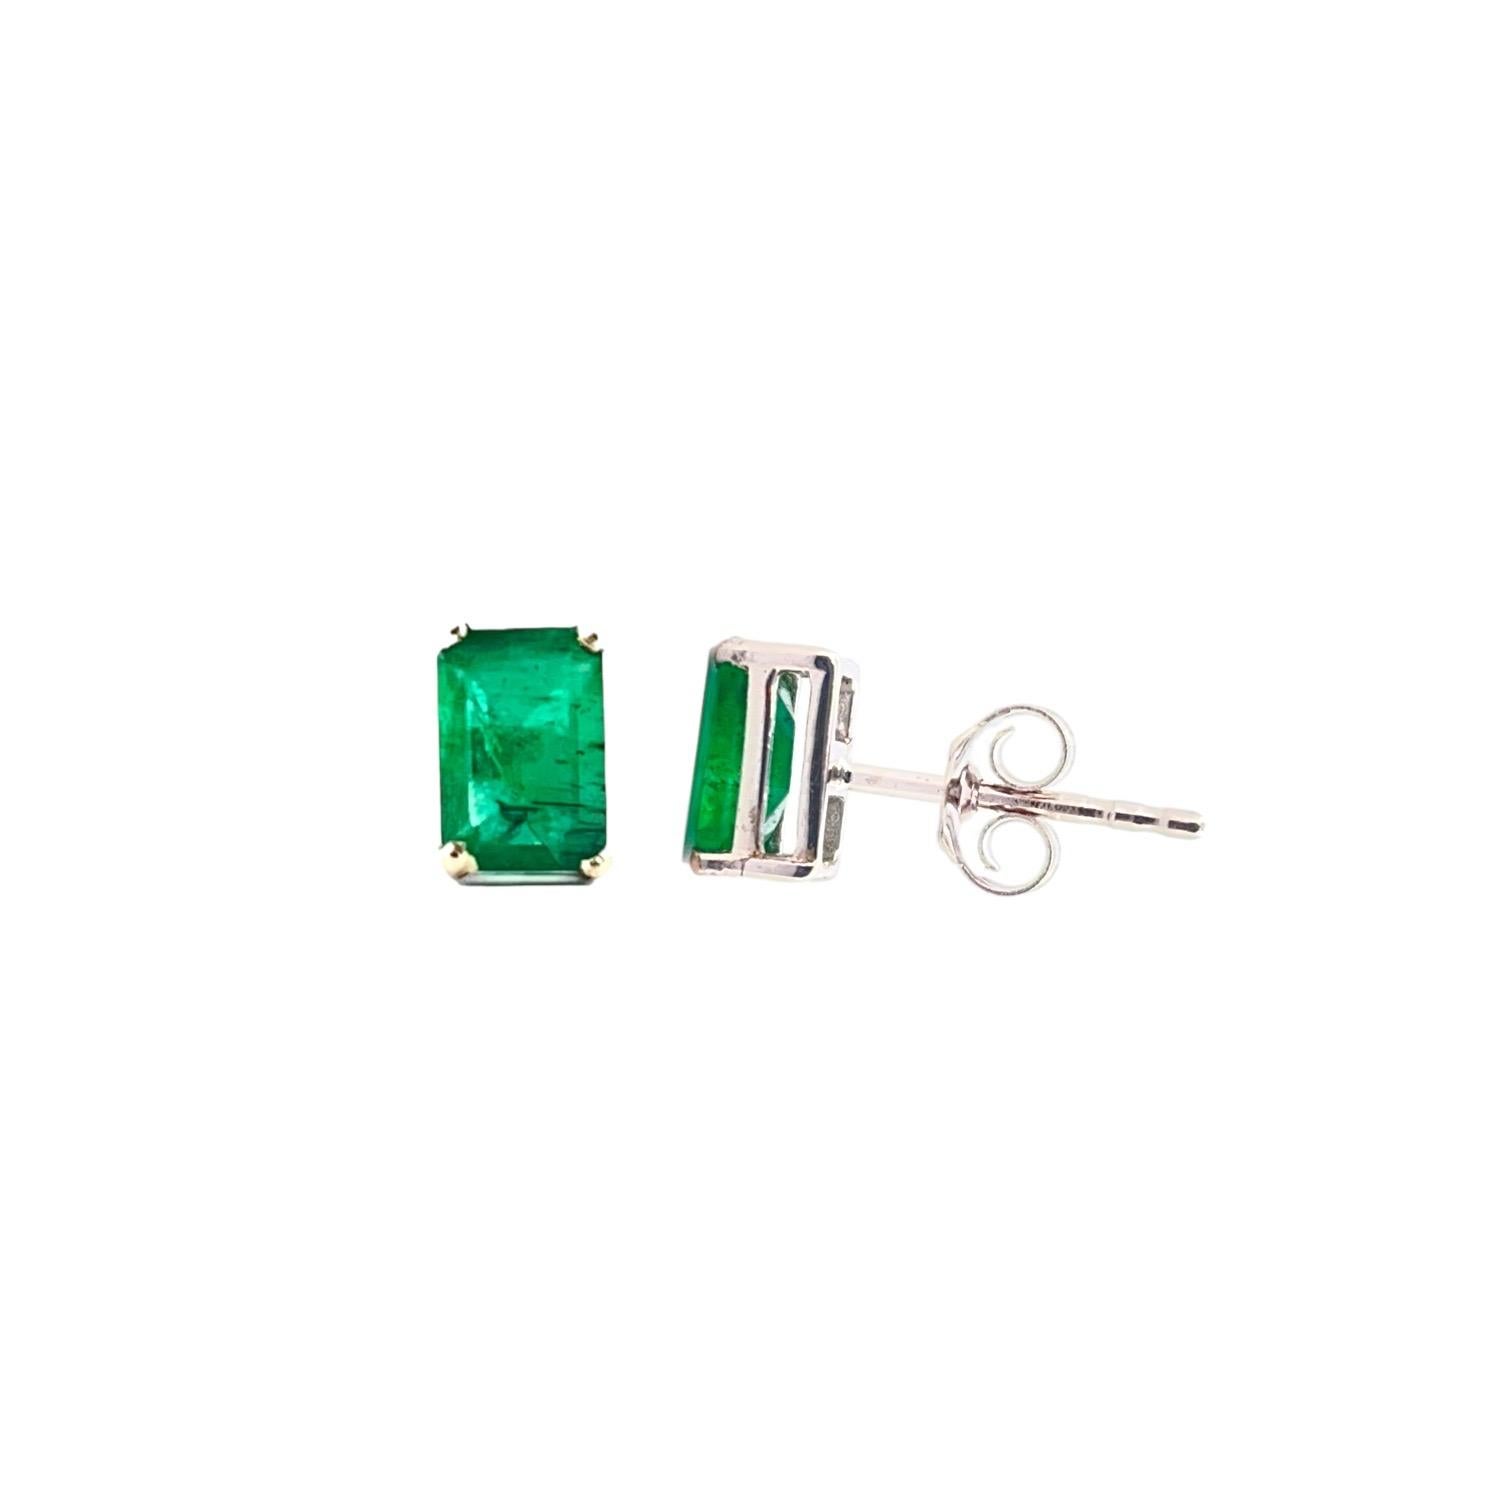 Emerald Cut 1 to 1.05 Ct Emerald Gemstone Stud Earrings - 14K White Gold For Sale